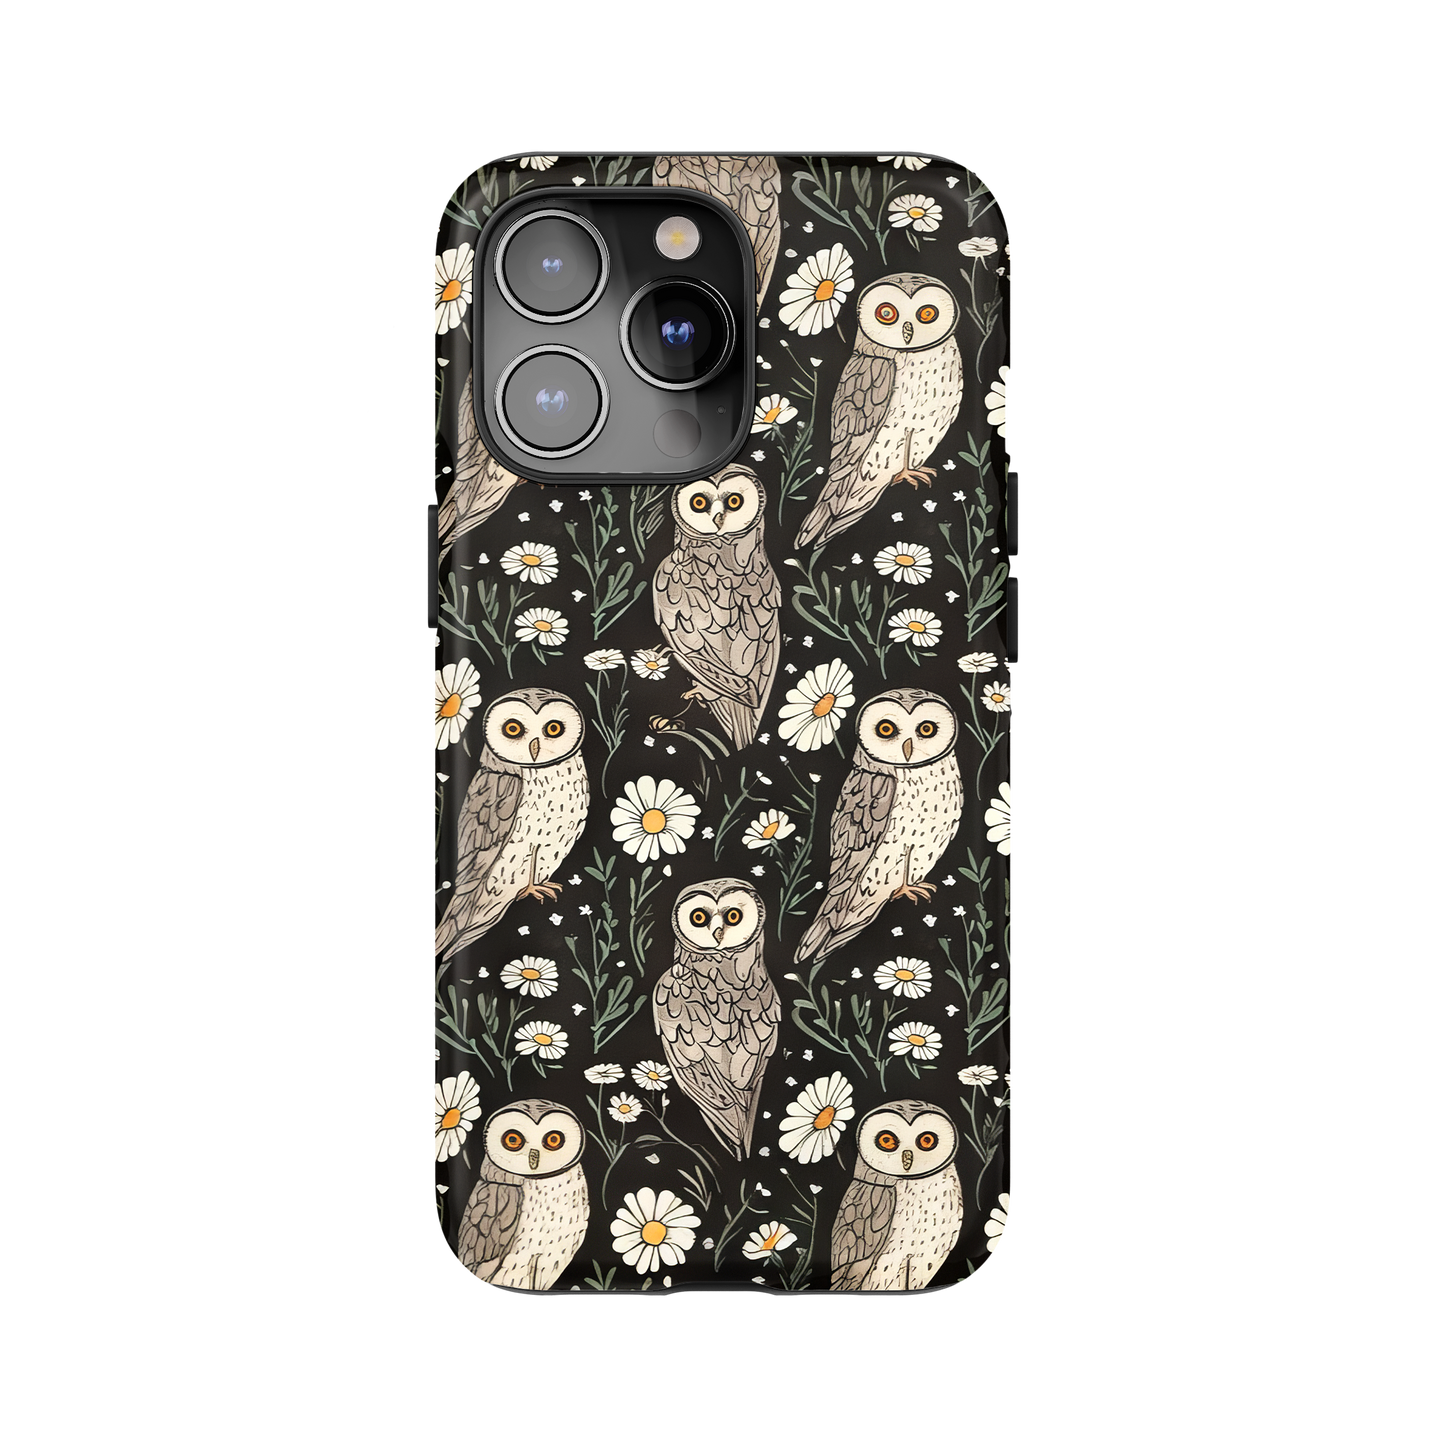 Daisy Owls Phone Case for iPhone and Samsung